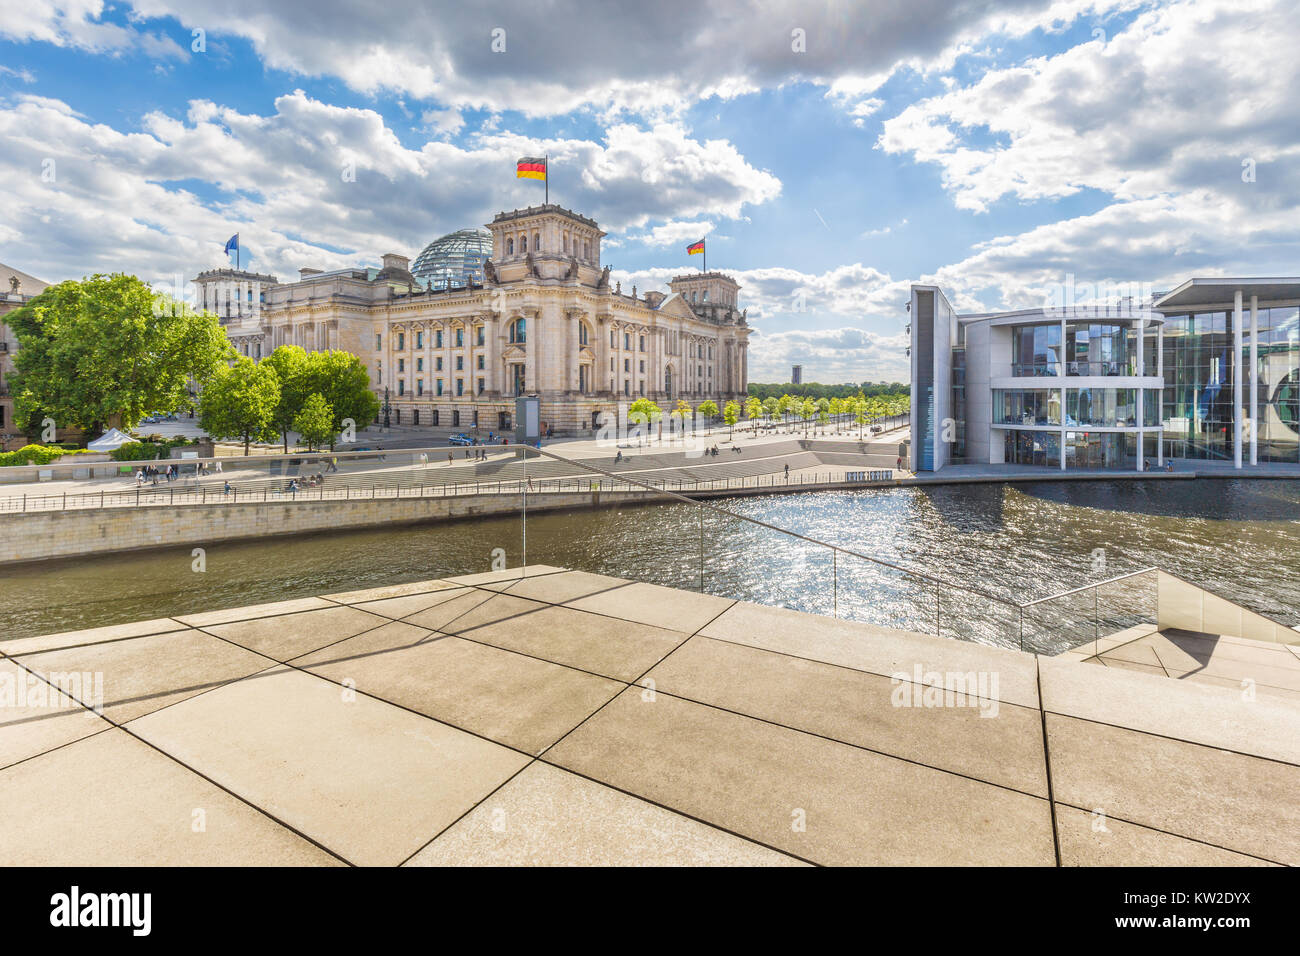 Panoramic view of Berlin government district with Spree river passing famous Reichstag building and Paul Lobe Haus on a beautiful sunny day with blue  Stock Photo